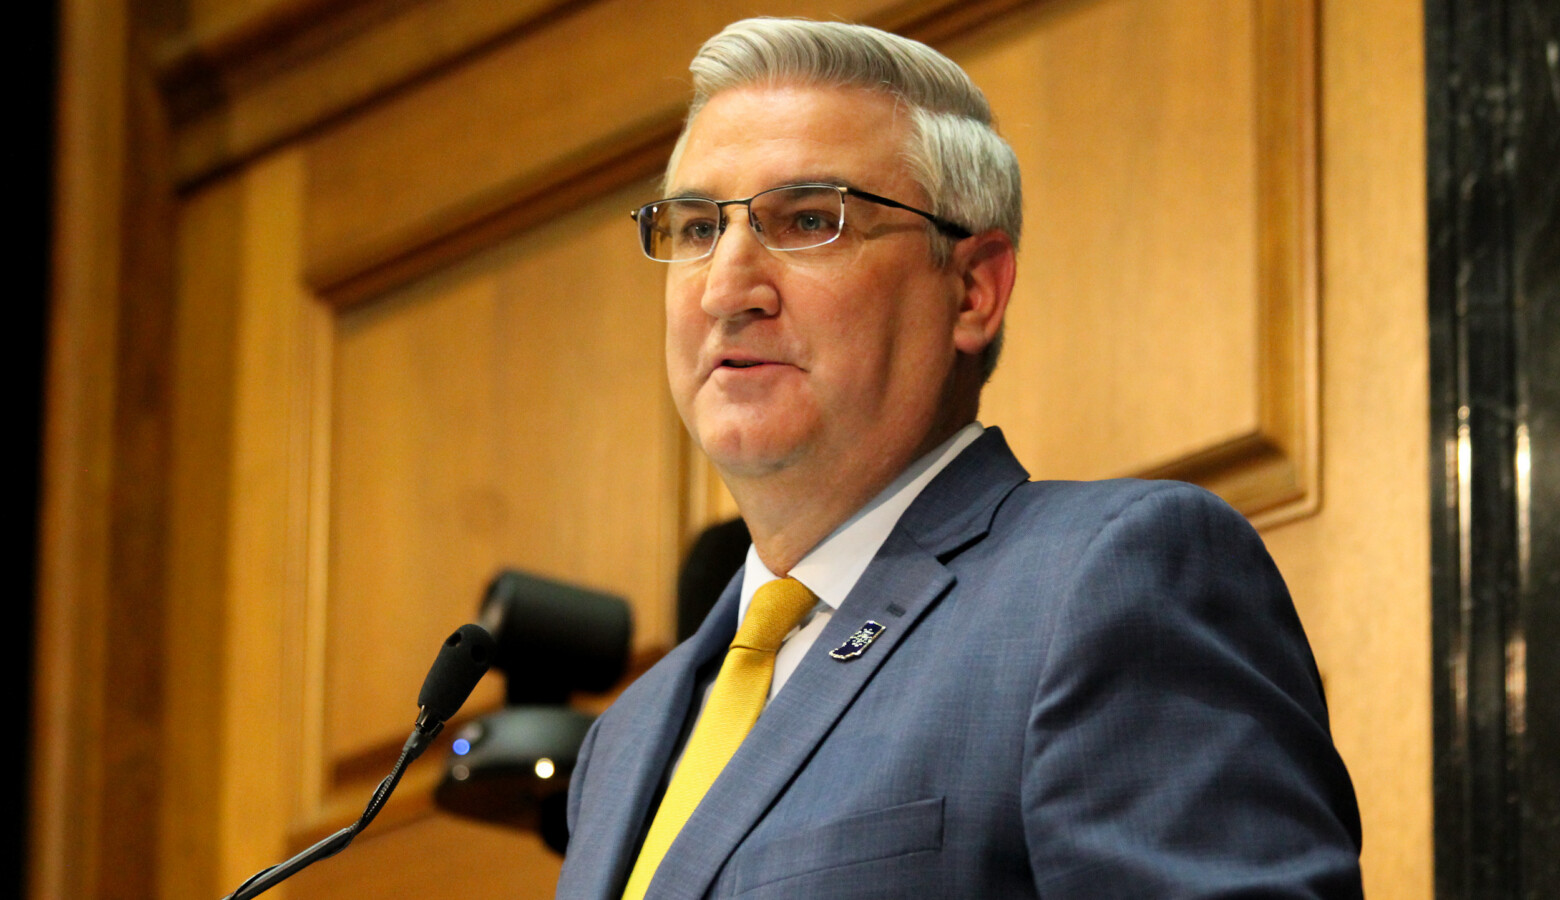 Gov. Eric Holcomb says the state will find resources for its rental assistance program if the initial funding is exhausted. (Lauren Chapman/IPB News)